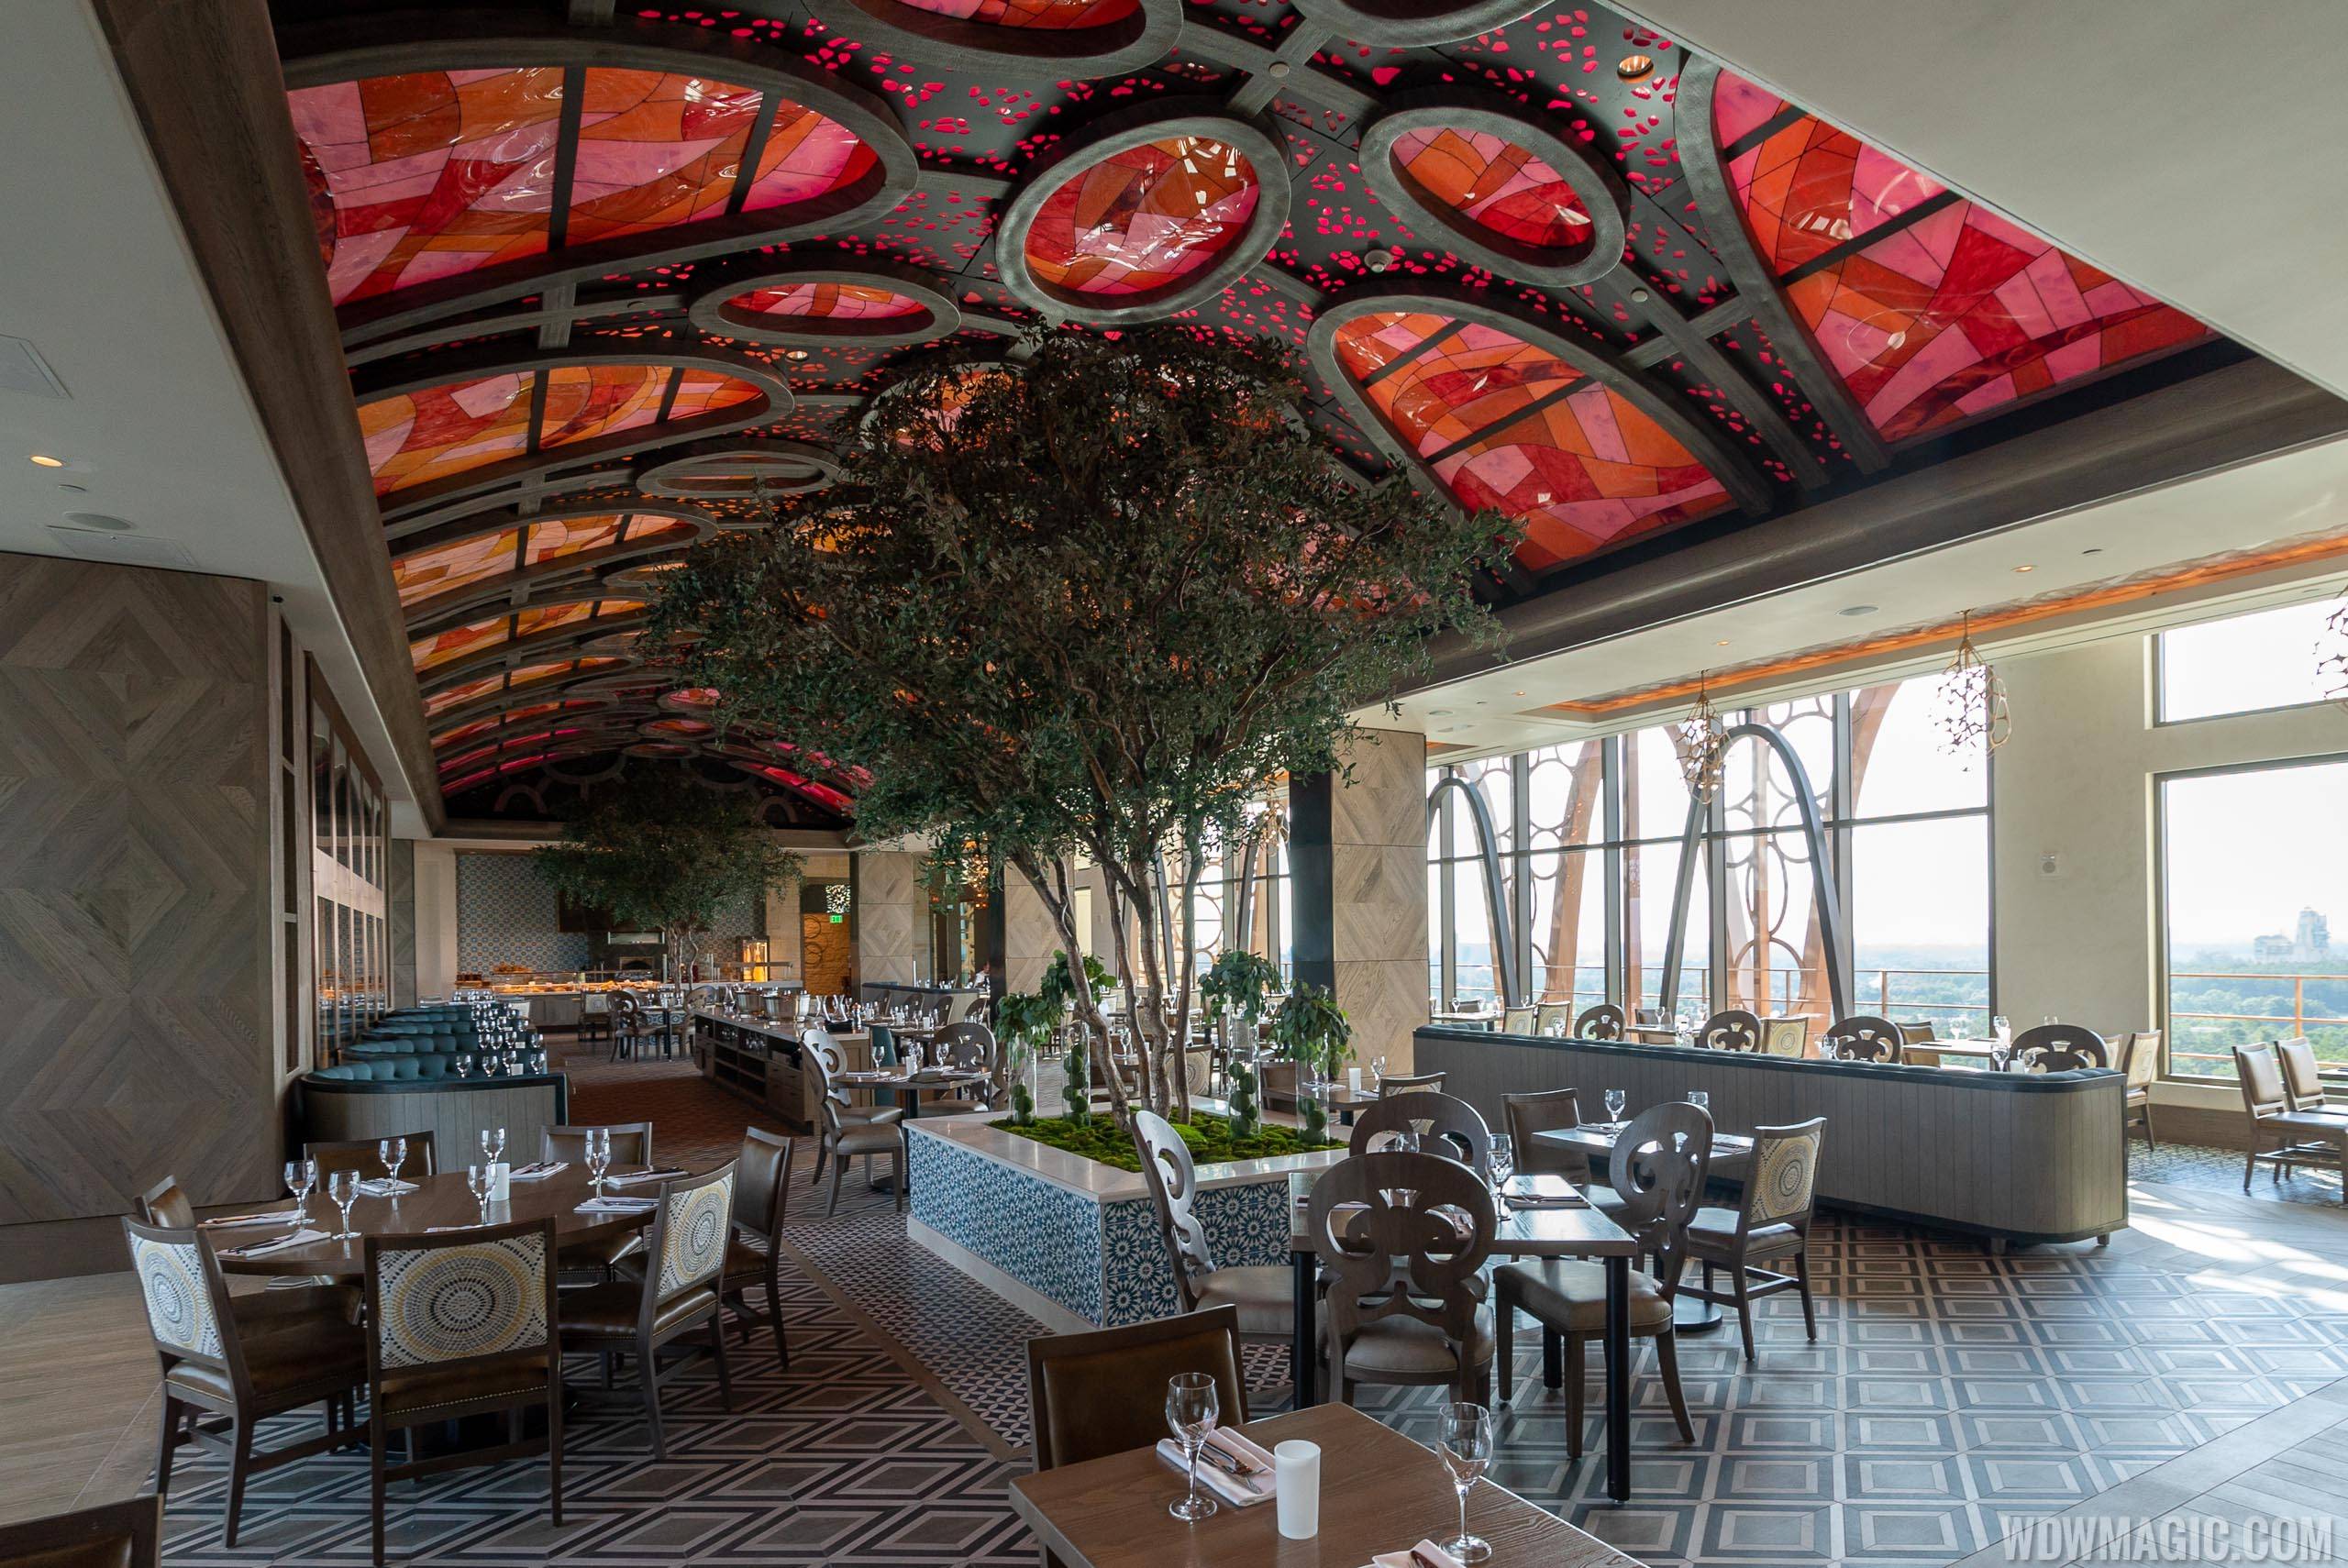 New Passholder and DVC event coming to the upcoming Toledo - Tapas, Steak and Seafood restaurant